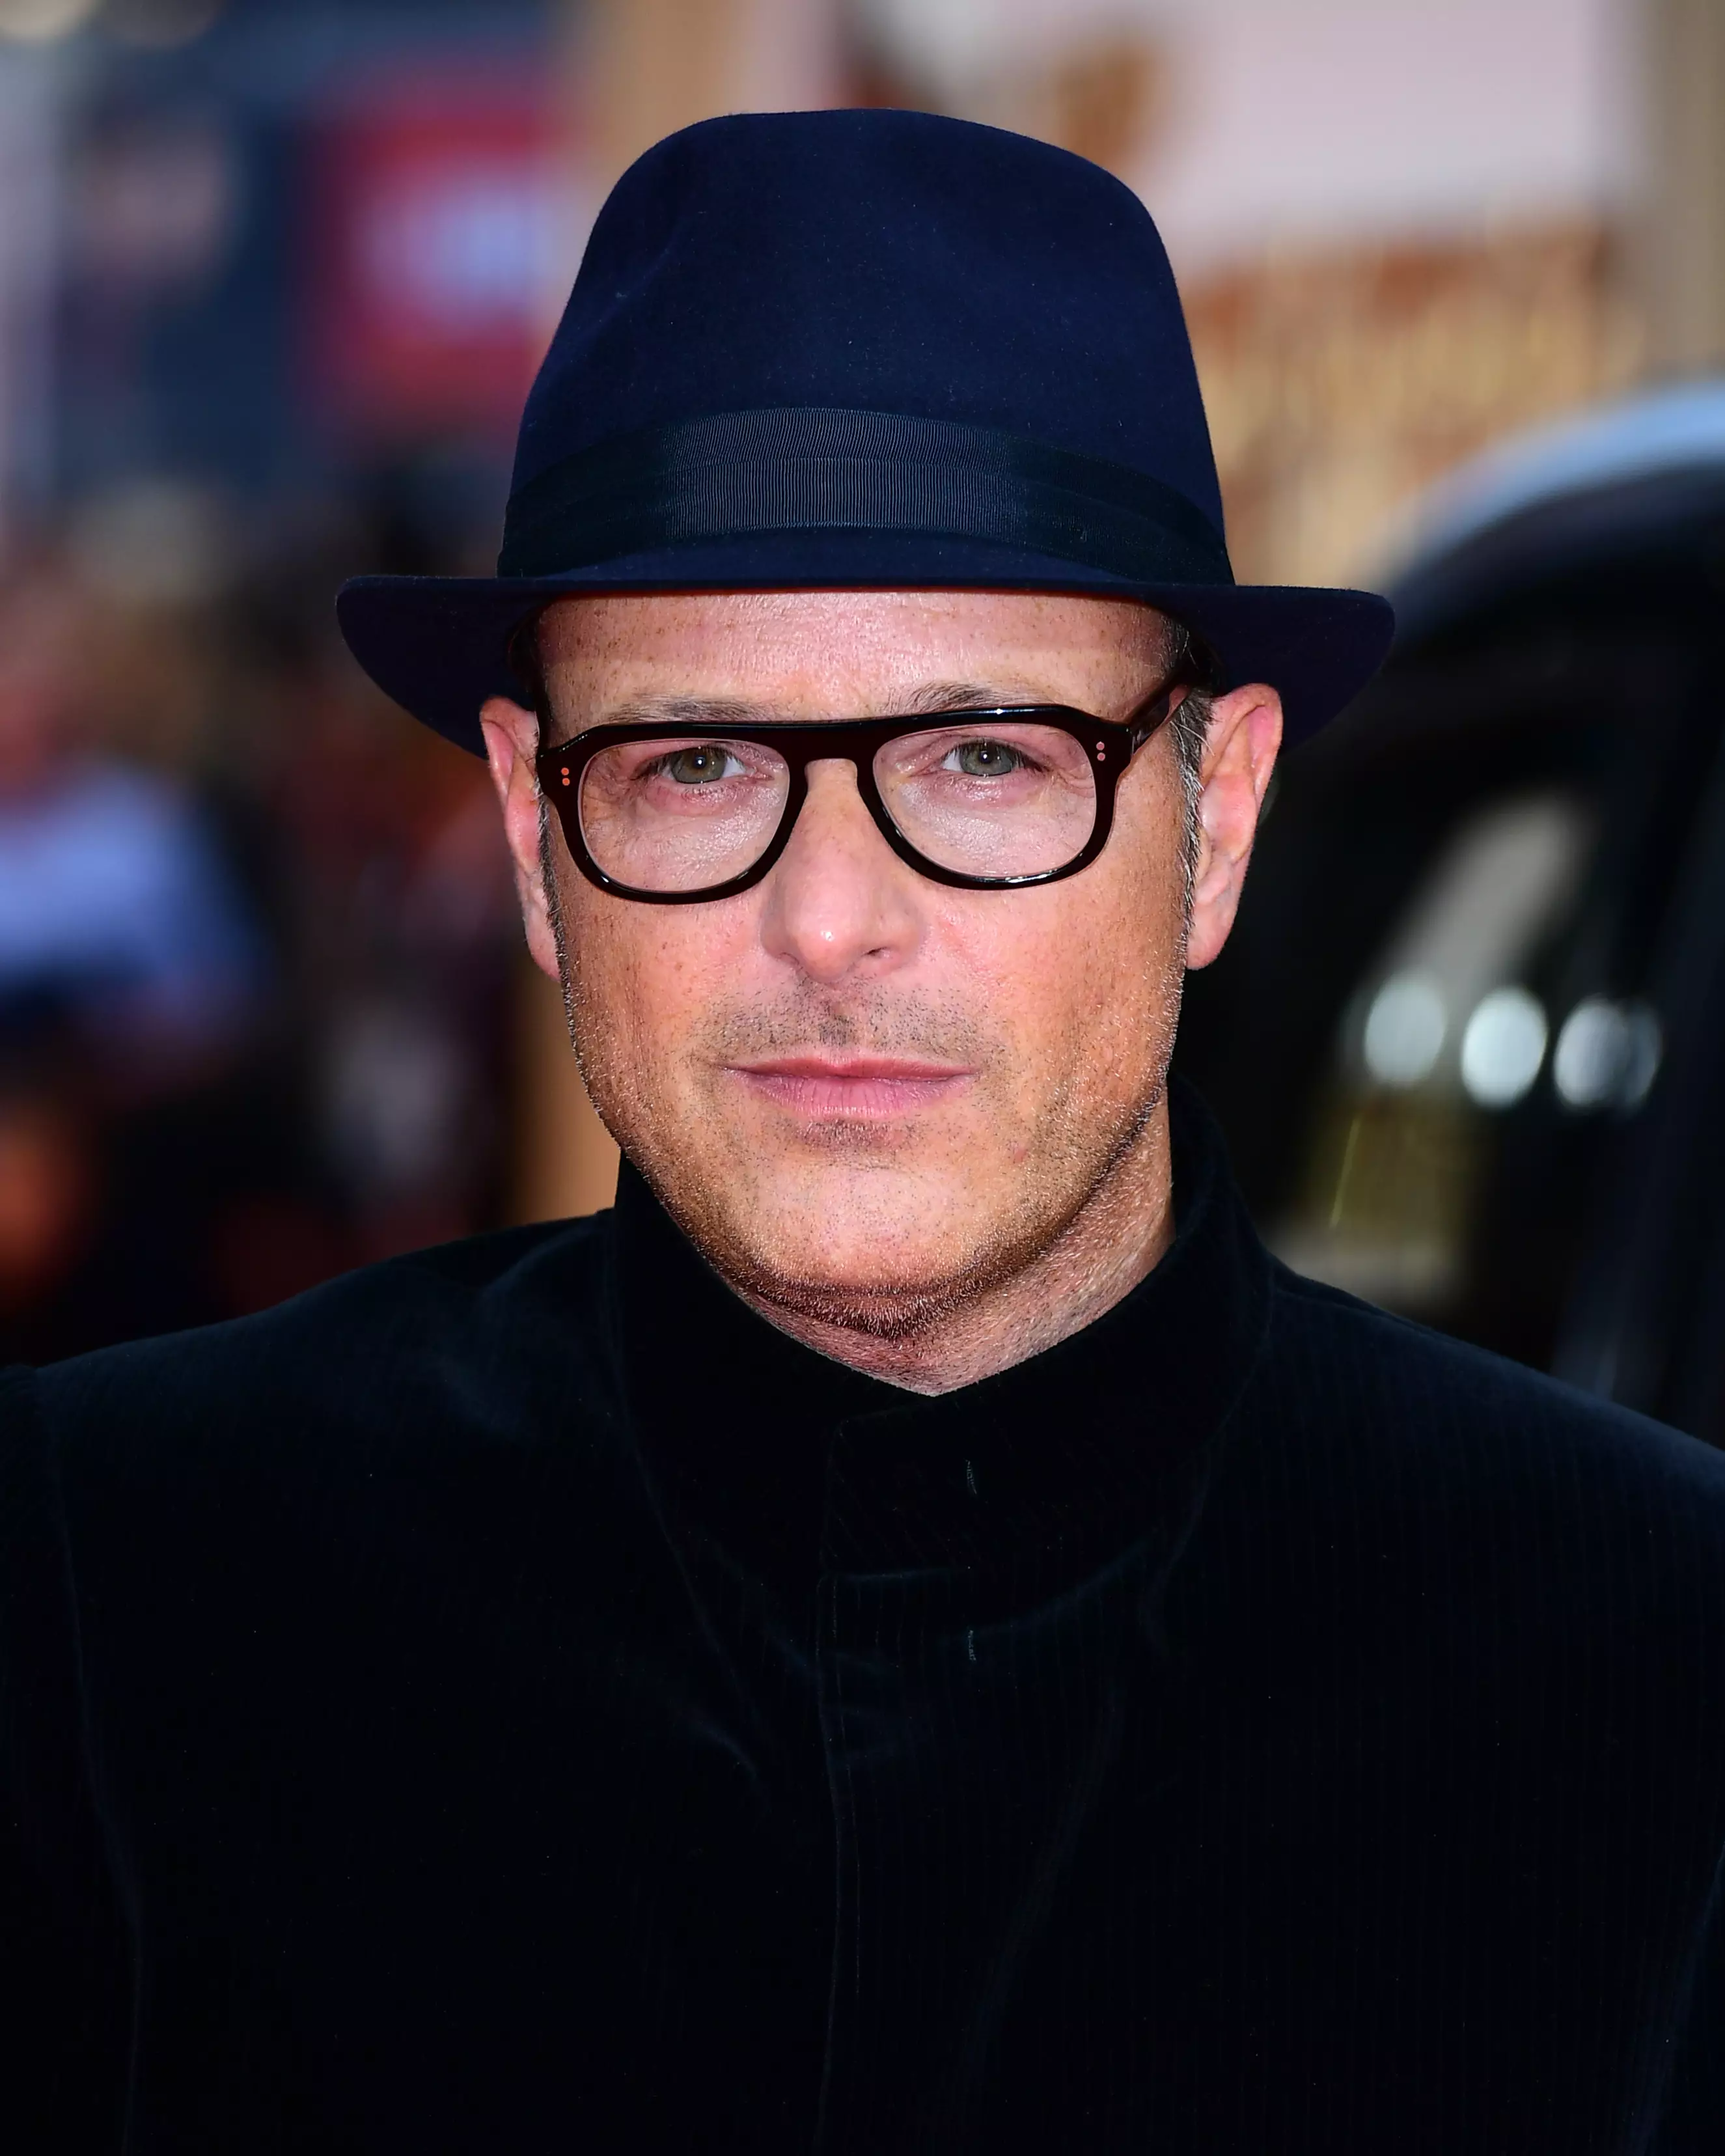 The director said filming has wrapped on the next installment of the Kingsman saga.